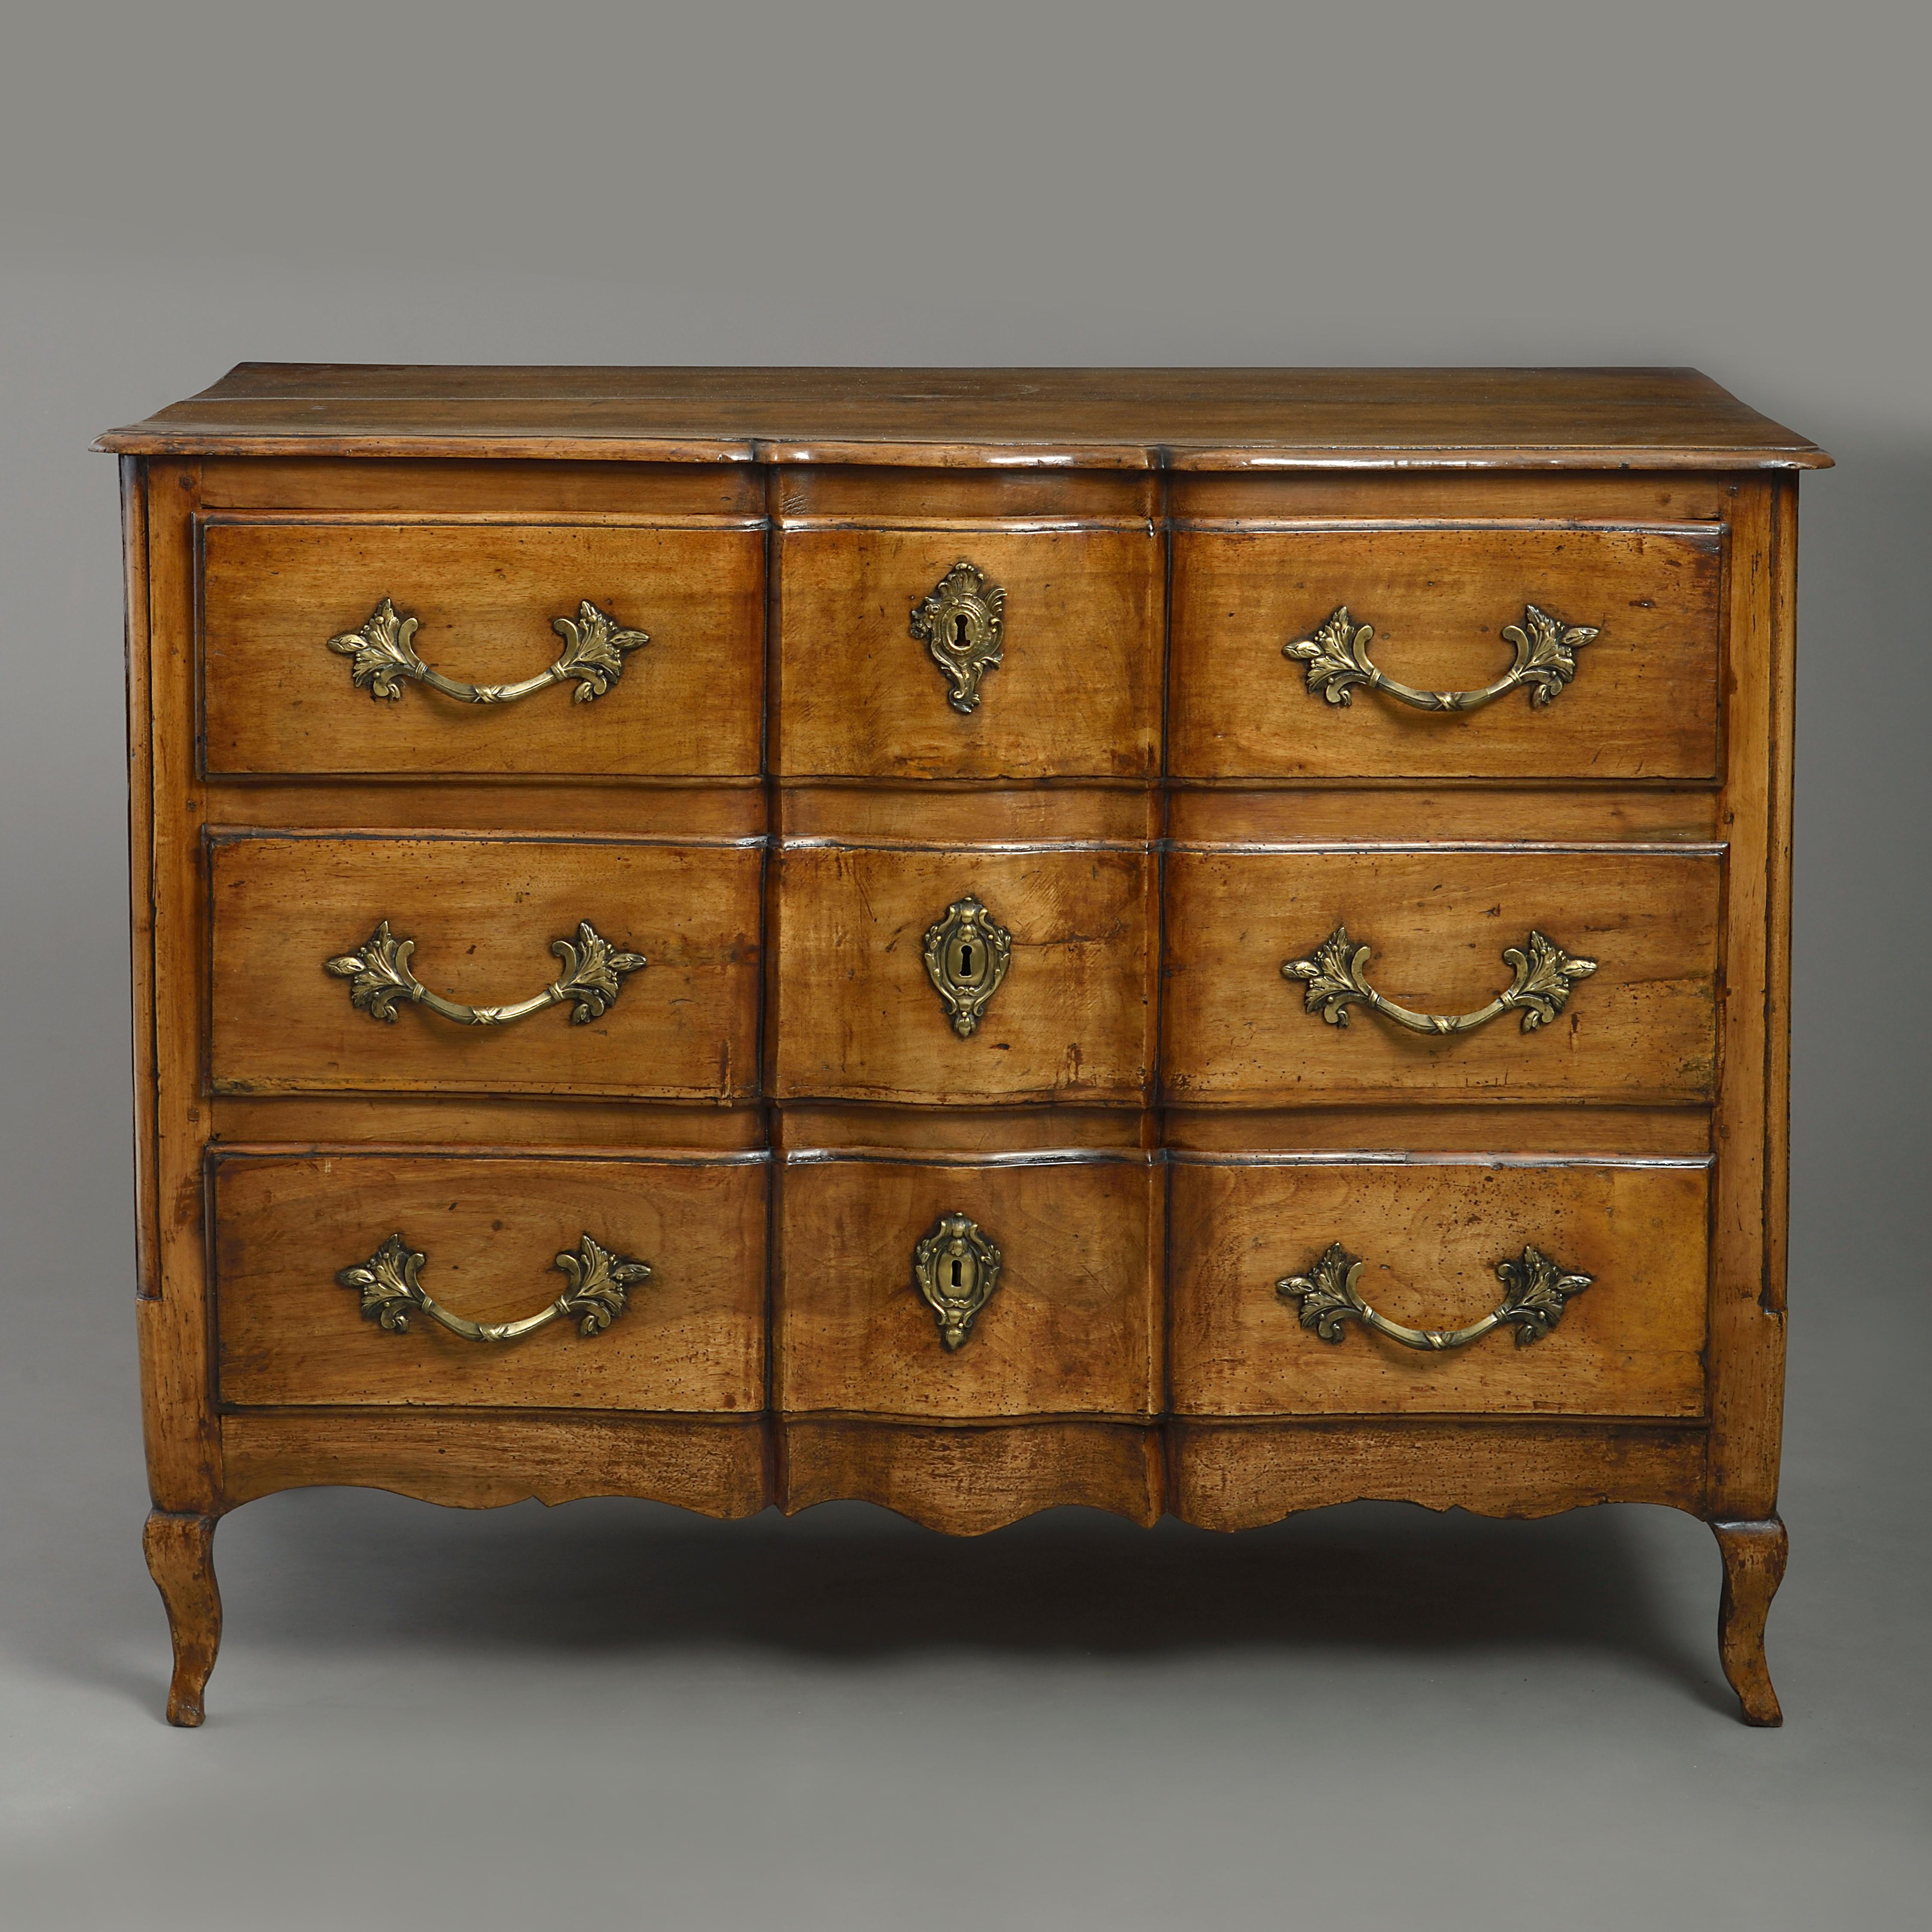 A fine mid-18th century Louis XV period walnut commode, the shaped overhanging top above three ripple moulded drawers, having foliate brass handles and cartouche form lock escutcheons, all raised upon cabriole legs.